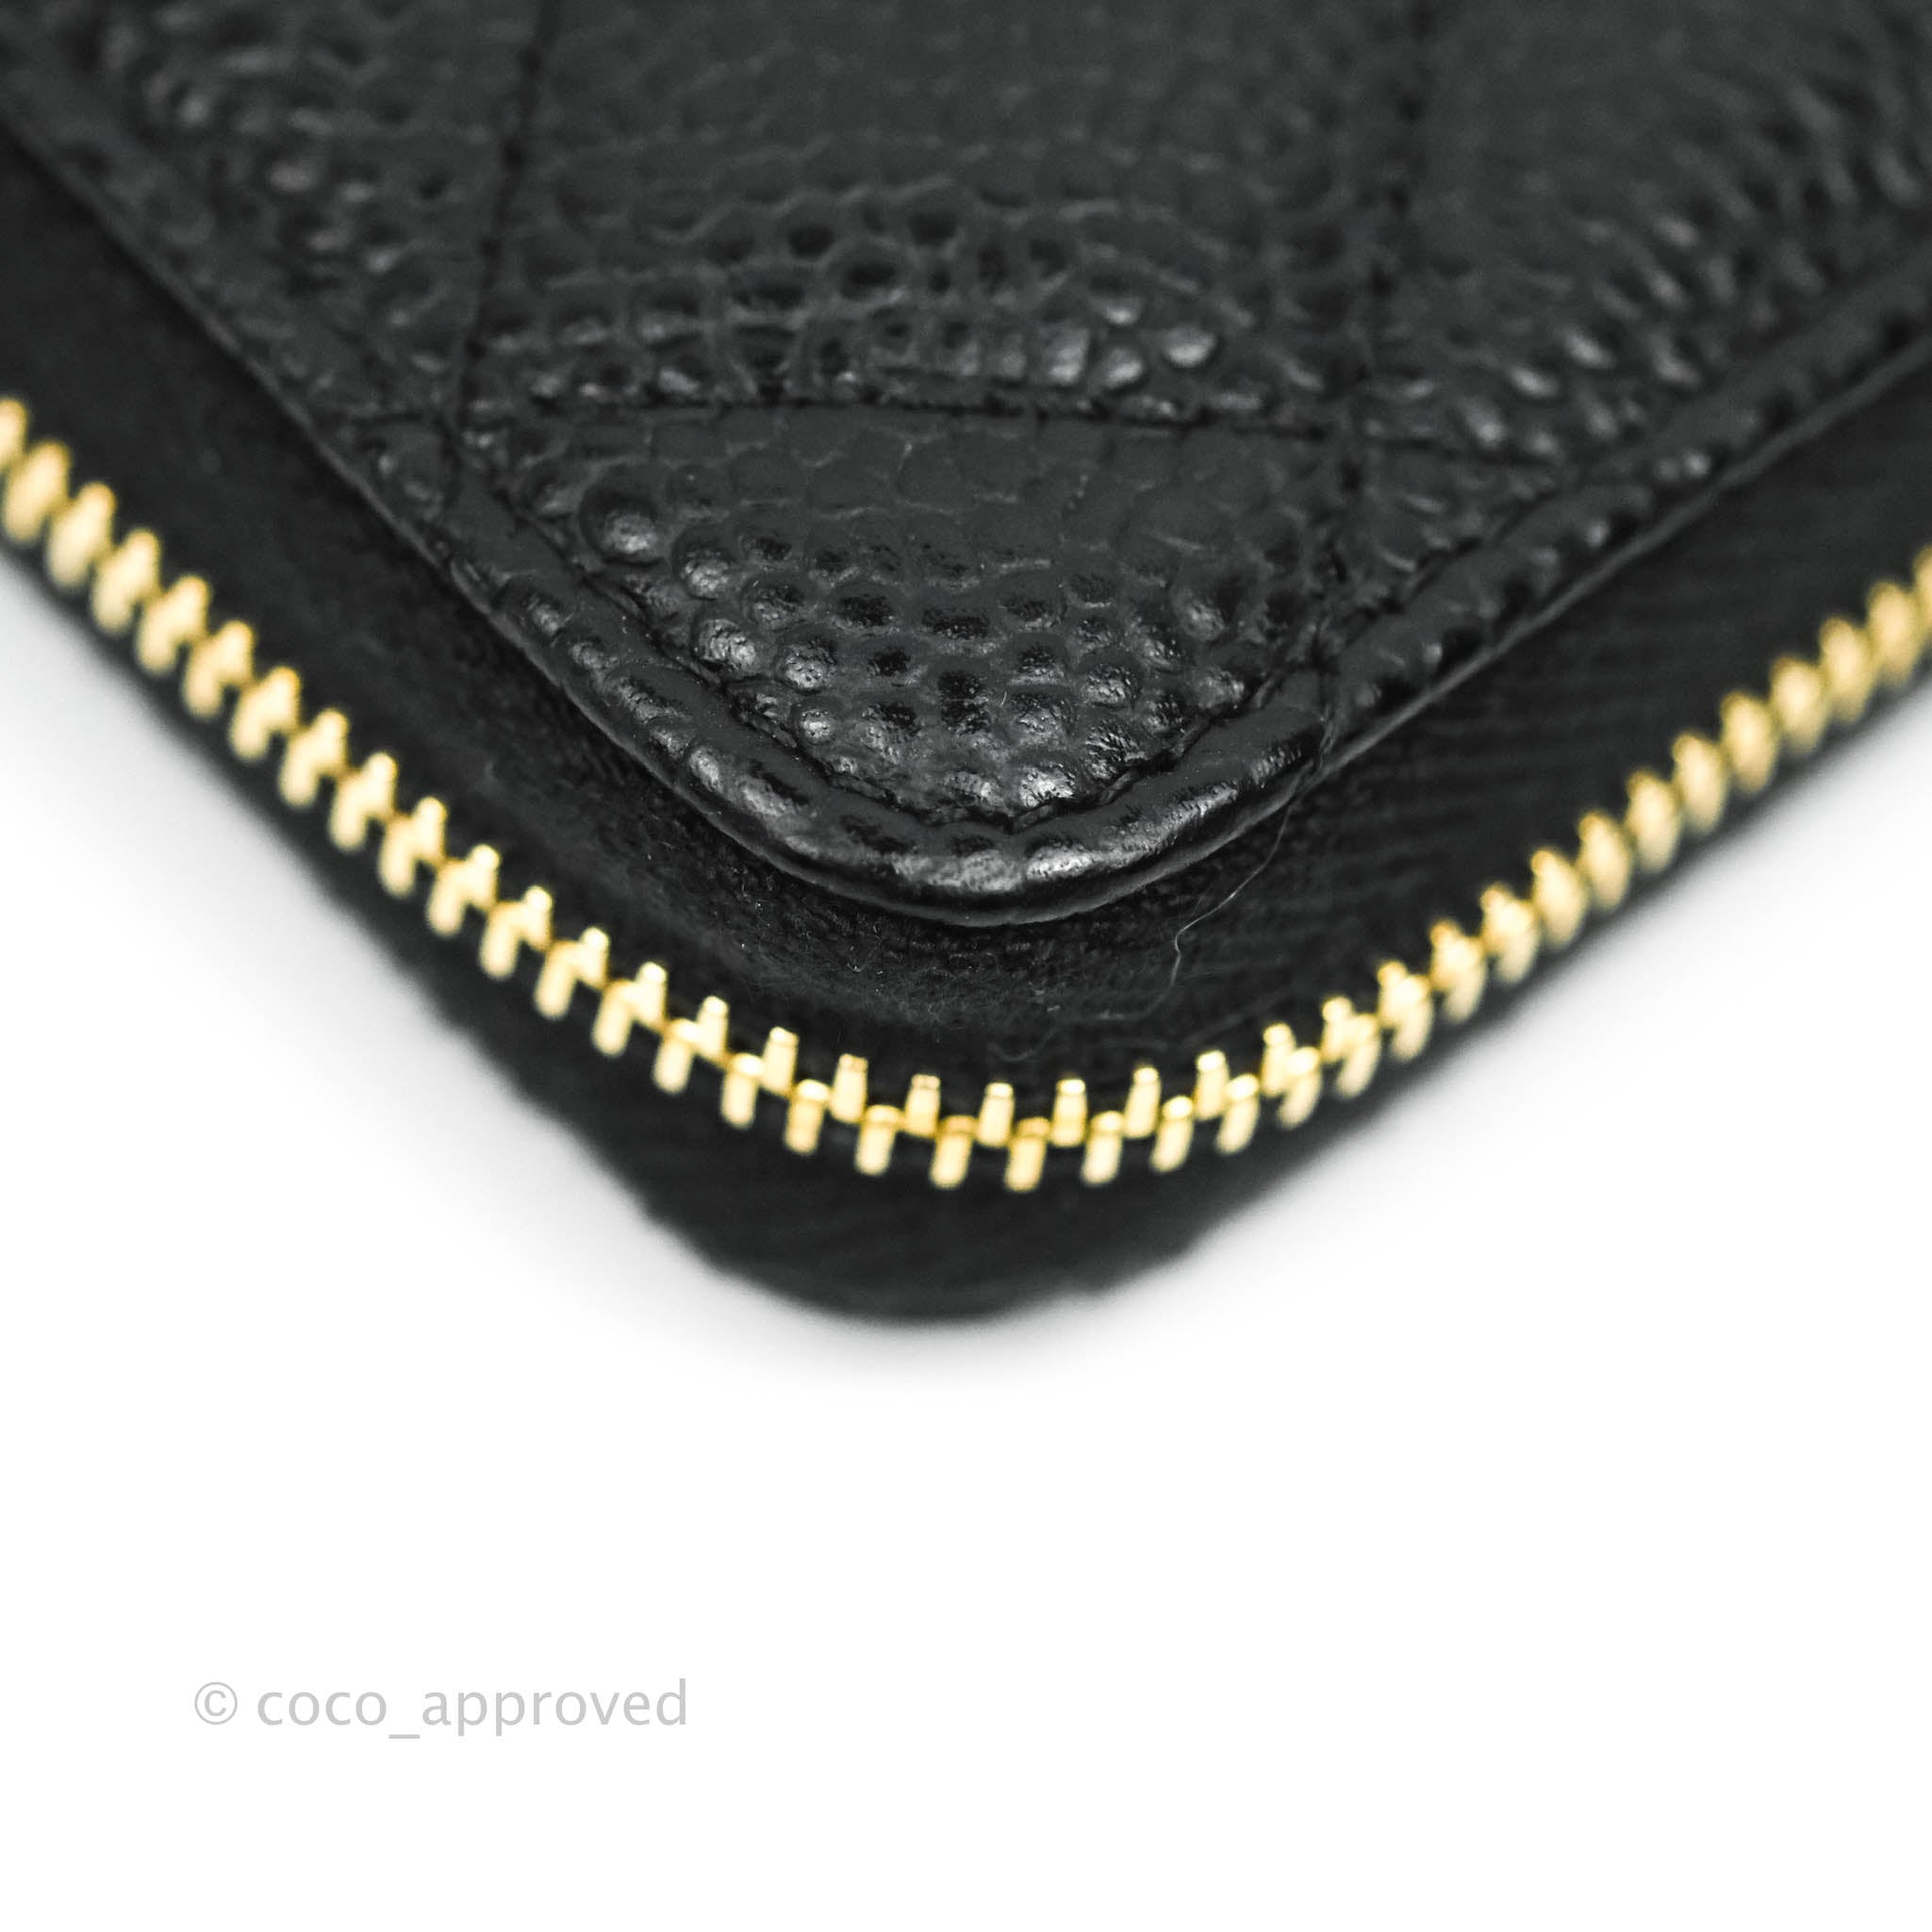 Chanel Classic Zipped Coin Purse in Black Caviar with Shiny Gold Hardware -  SOLD